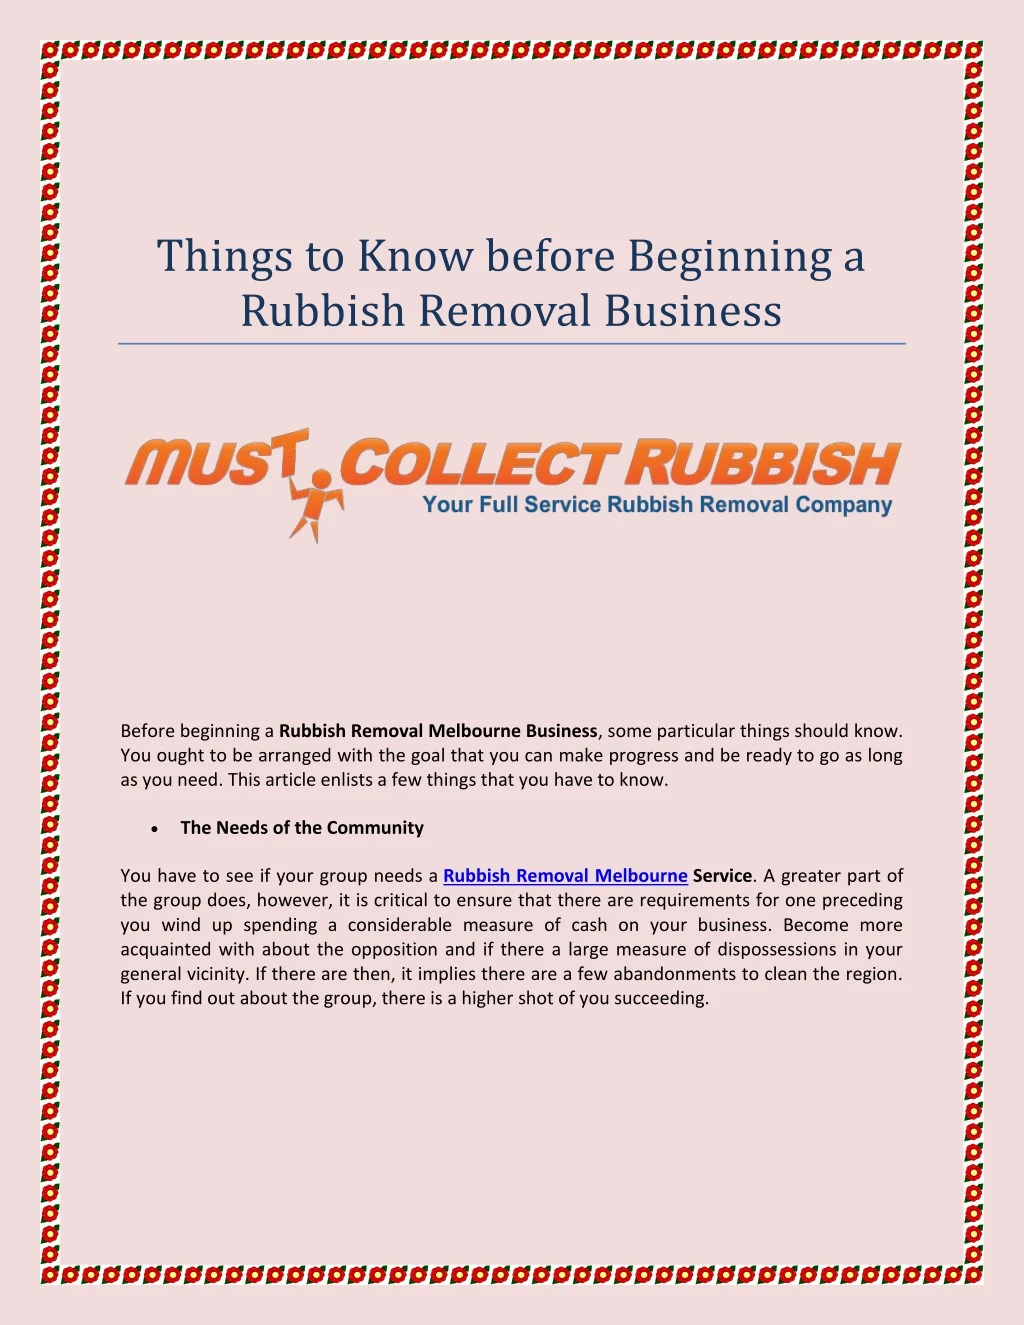 things to know before beginning a rubbish removal